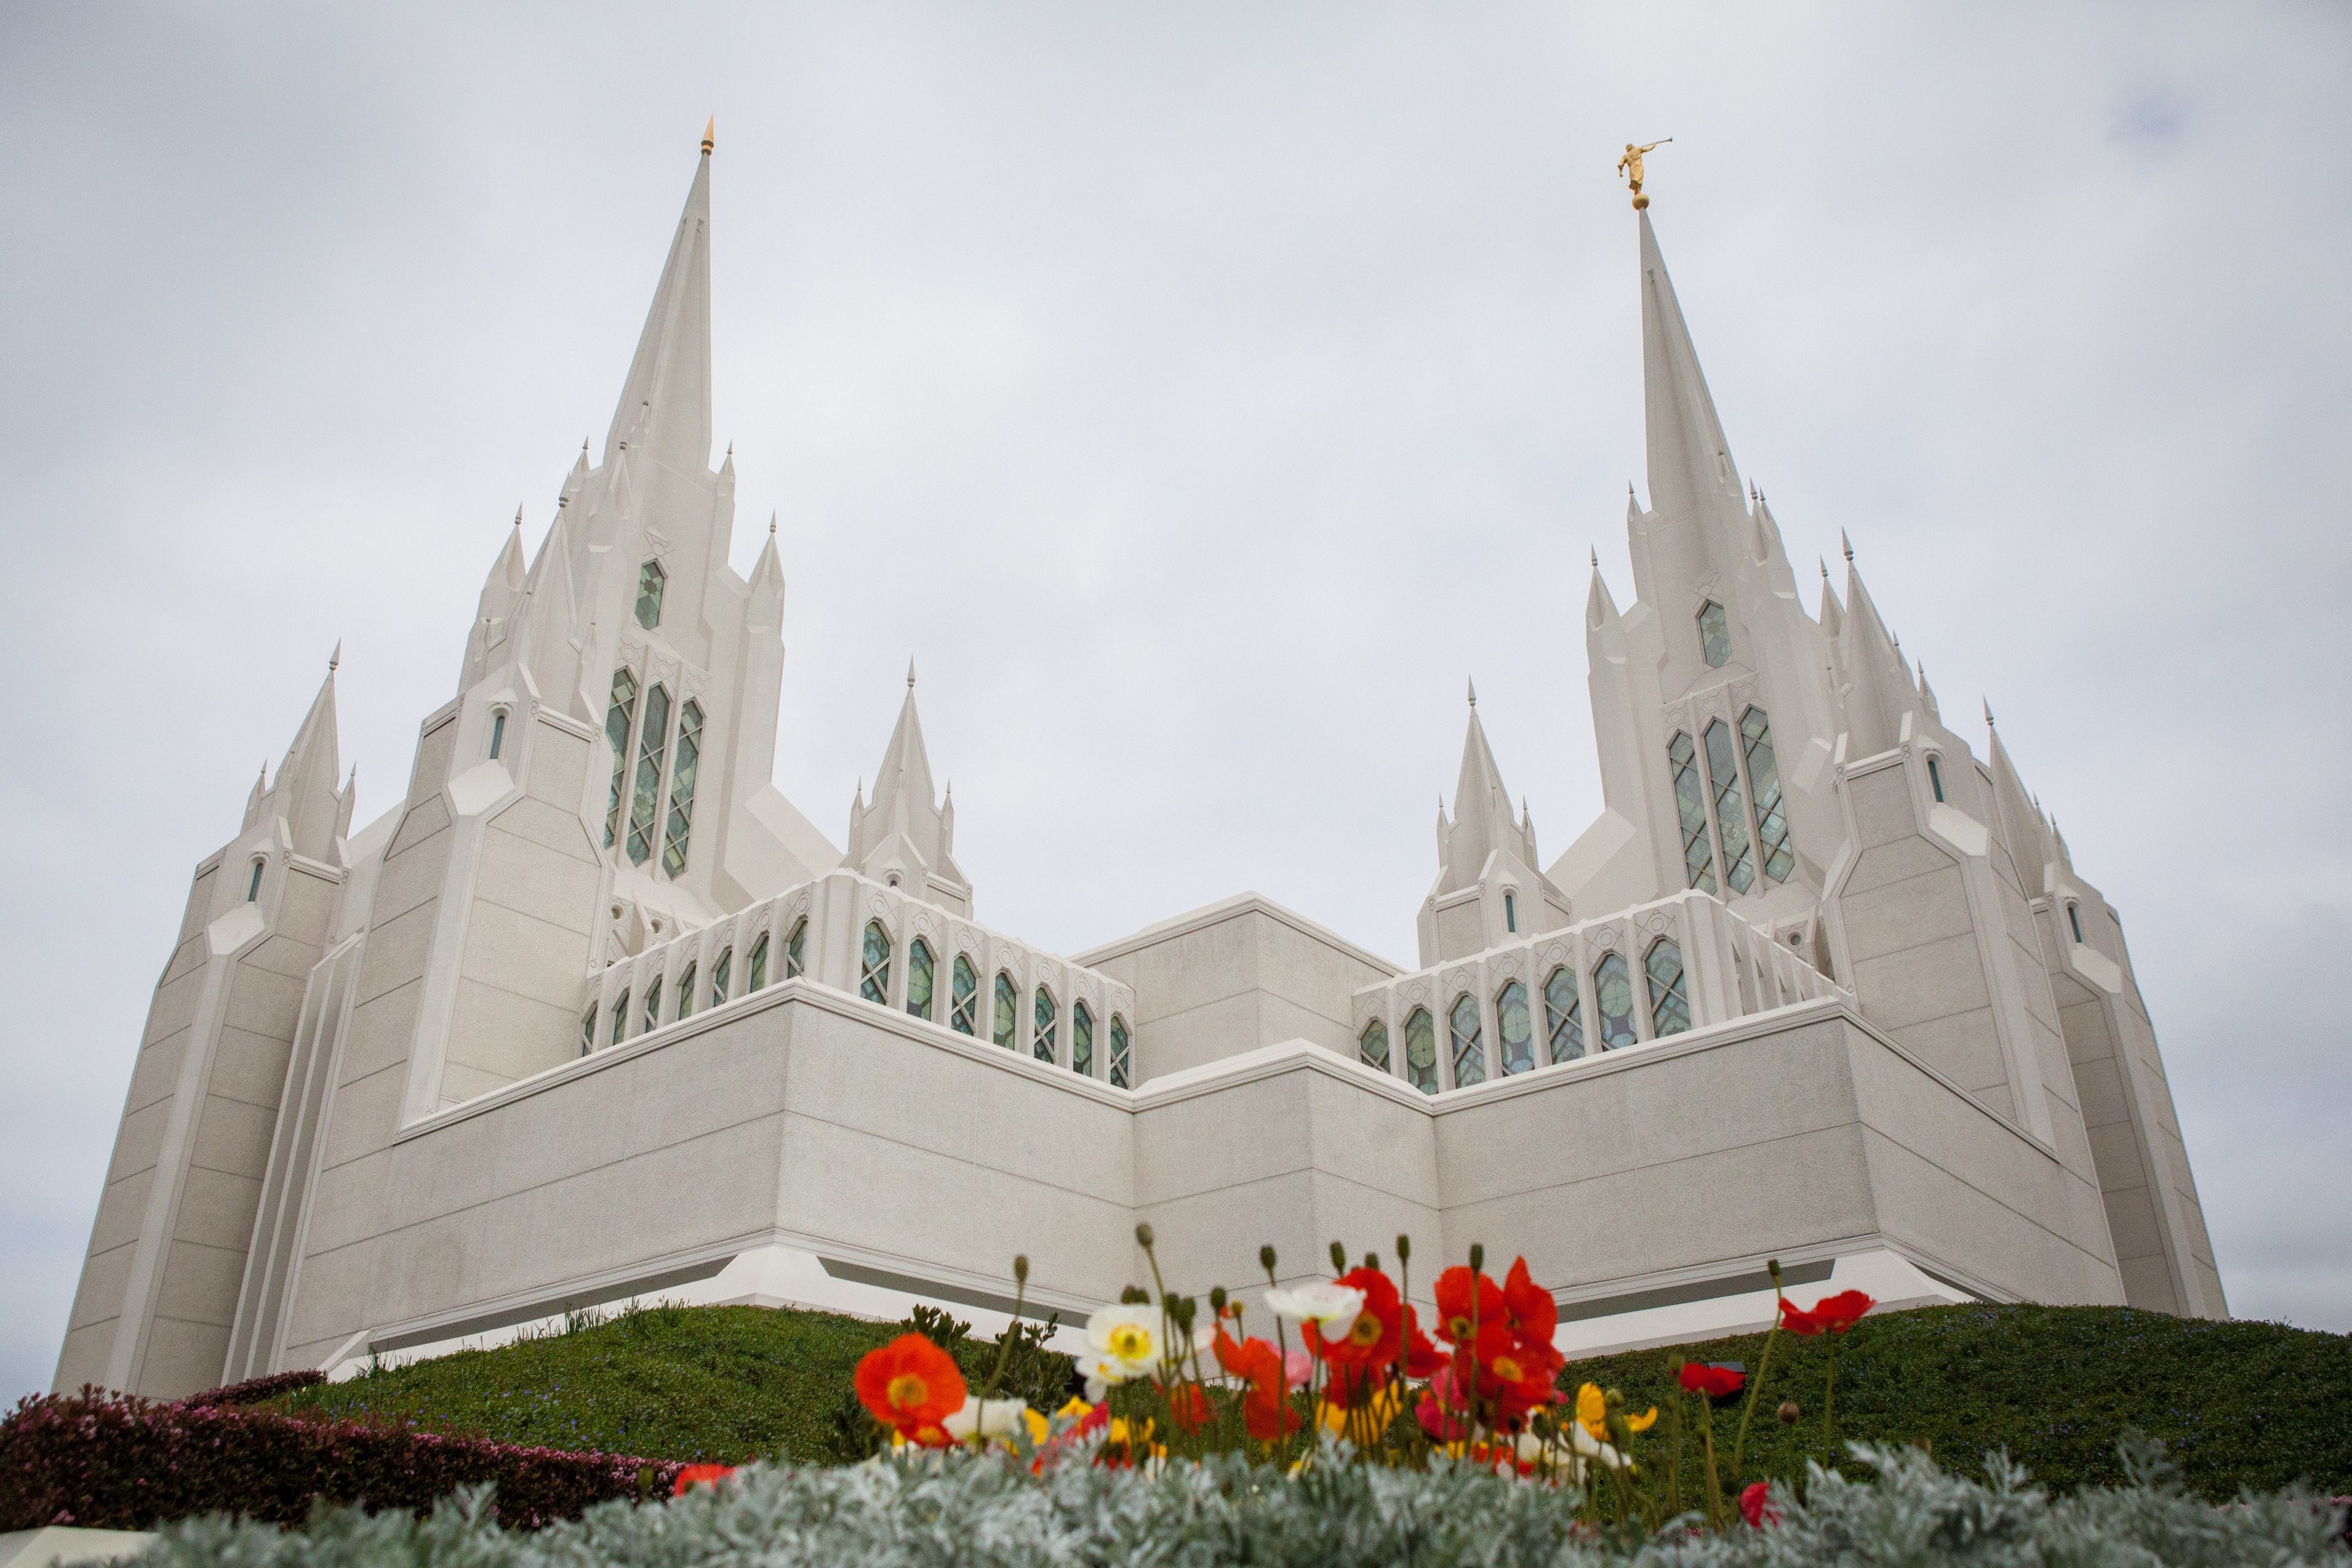 The San Diego California Temple, including scenery.